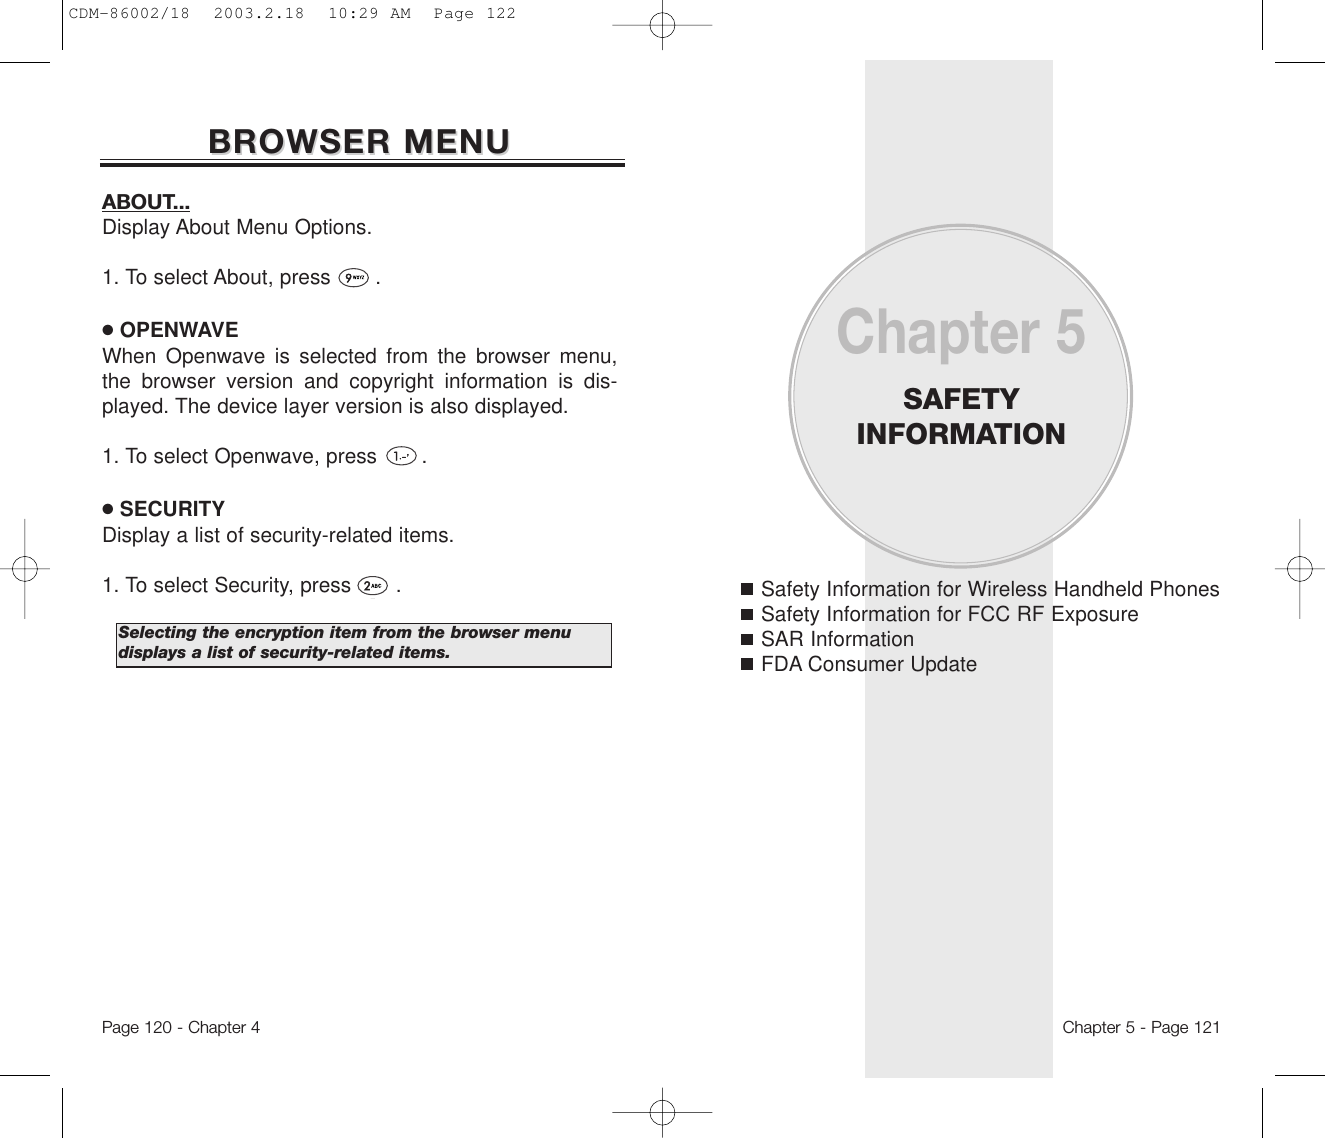 Safety Information for Wireless Handheld PhonesSafety Information for FCC RF ExposureSAR InformationFDA Consumer UpdateChapter 5SAFETY INFORMATIONChapter 5 - Page 121Page 120 - Chapter 4BROWSER MENUBROWSER MENUABOUT...Display About Menu Options. 1. To select About, press       .●OPENWAVEWhen Openwave is selected from the browser menu,the browser version and copyright information is dis-played. The device layer version is also displayed.1. To select Openwave, press       .●SECURITYDisplay a list of security-related items.1. To select Security, press       .Selecting the encryption item from the browser menu  displays a list of security-related items.CDM-86002/18  2003.2.18  10:29 AM  Page 122